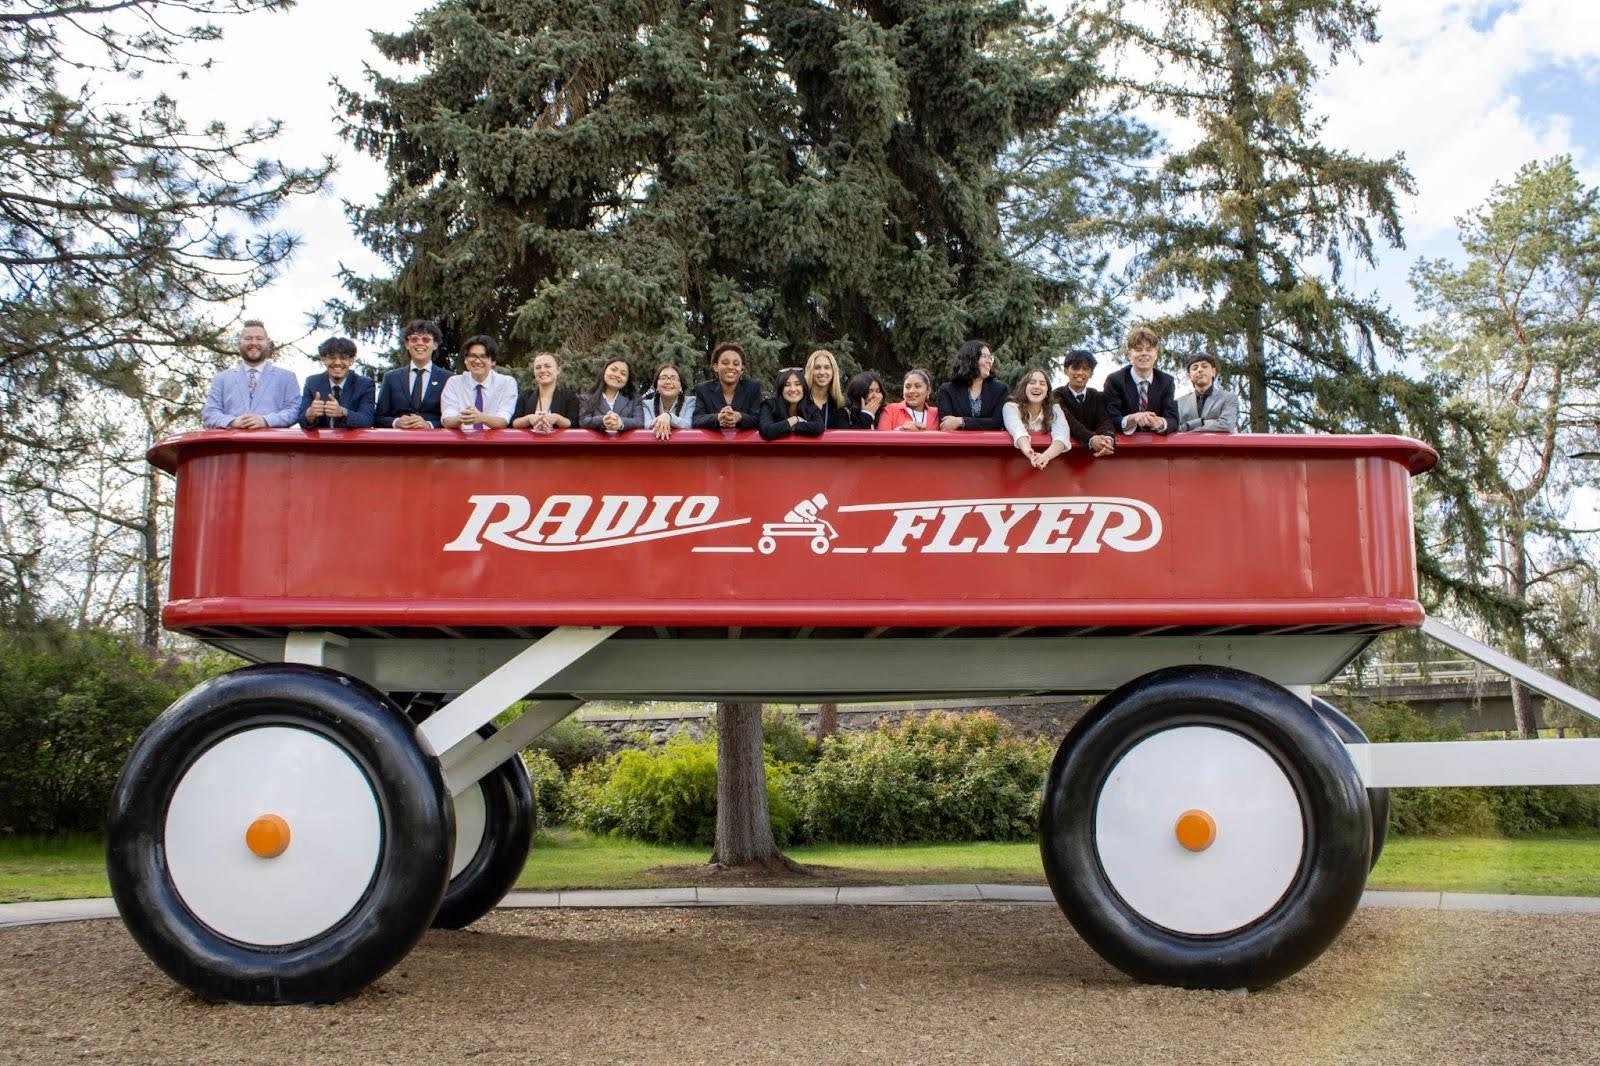 Students in a large wagon